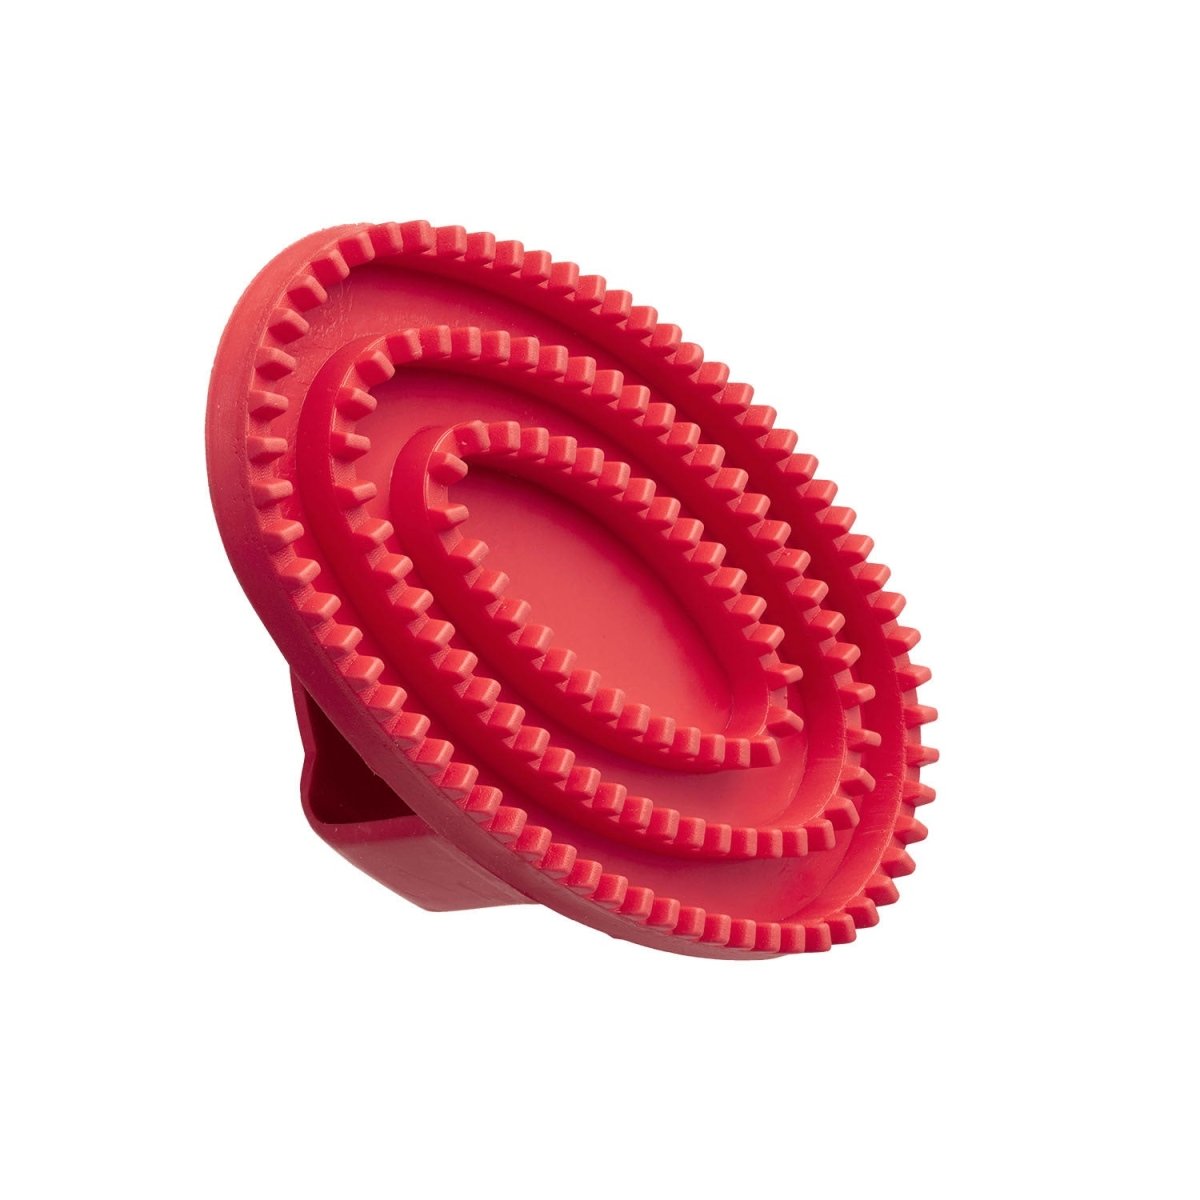 Bitz Curry Comb Rubber Small - Red - Small